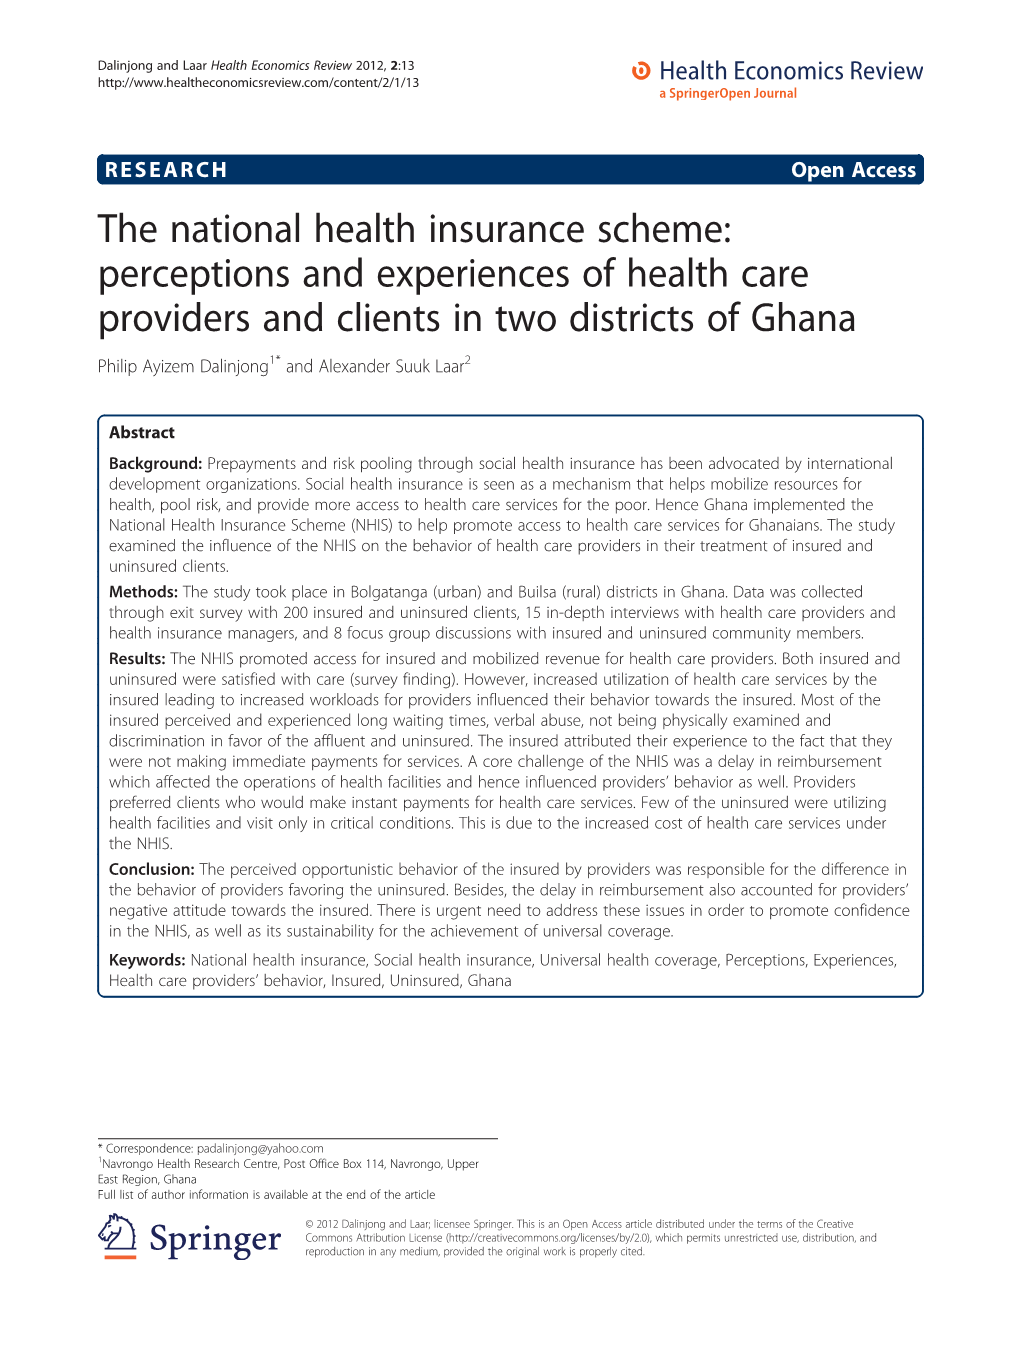 The National Health Insurance Scheme: Perceptions and Experiences of Health Care Providers and Clients in Two Districts of Ghana